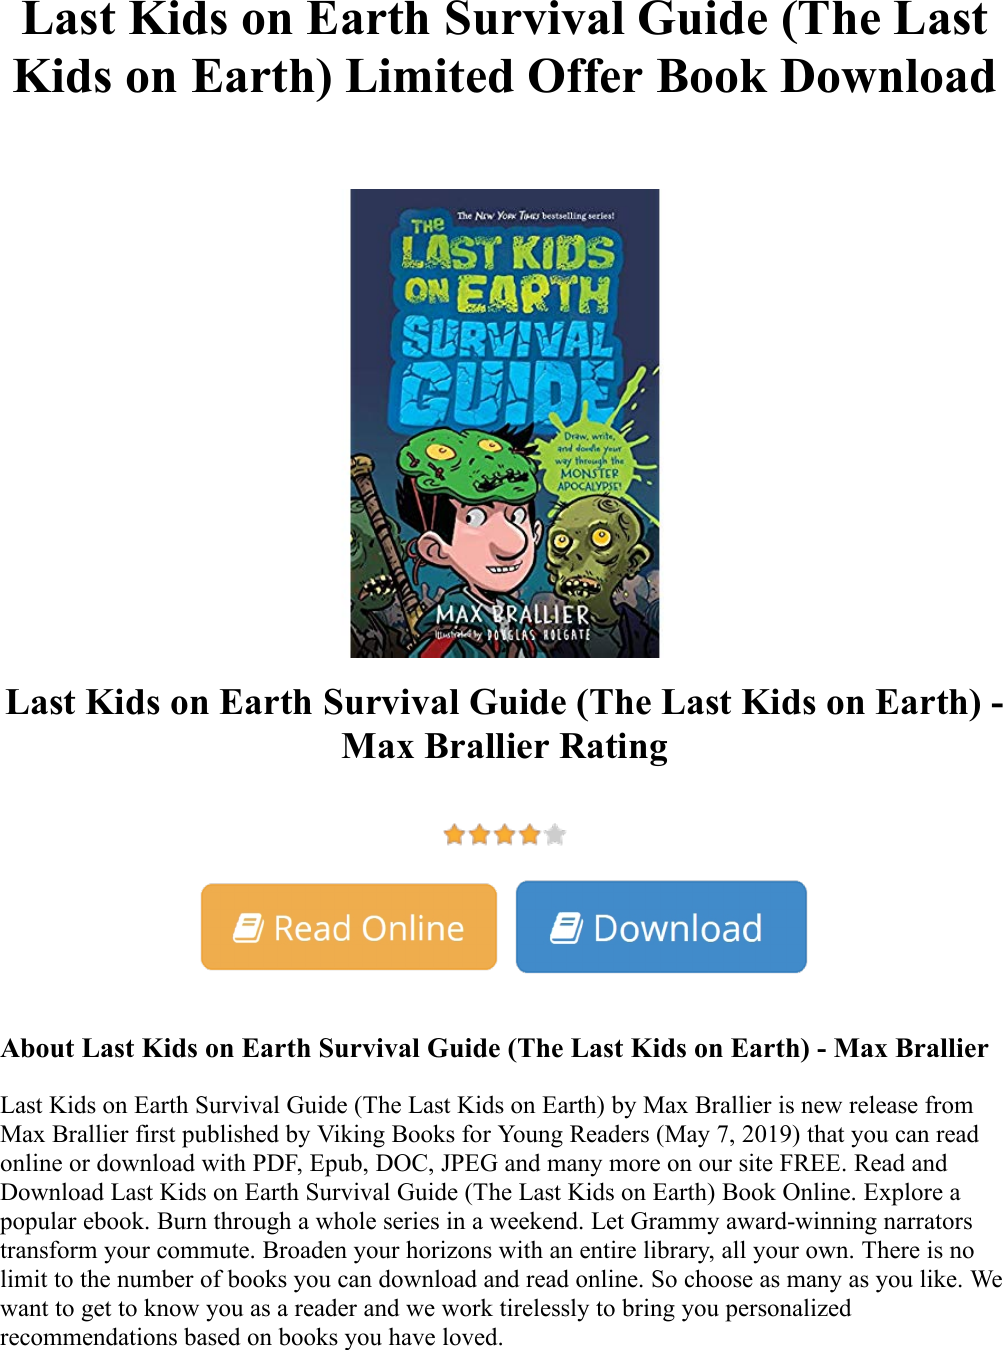 Page 1 of 2 - Last Kids On Earth Survival Guide (The Earth) - Max Brallier Limited Offer Book  Last-Kids-on-Earth-Survival-Guide-The-Last-Kids-on-Earth